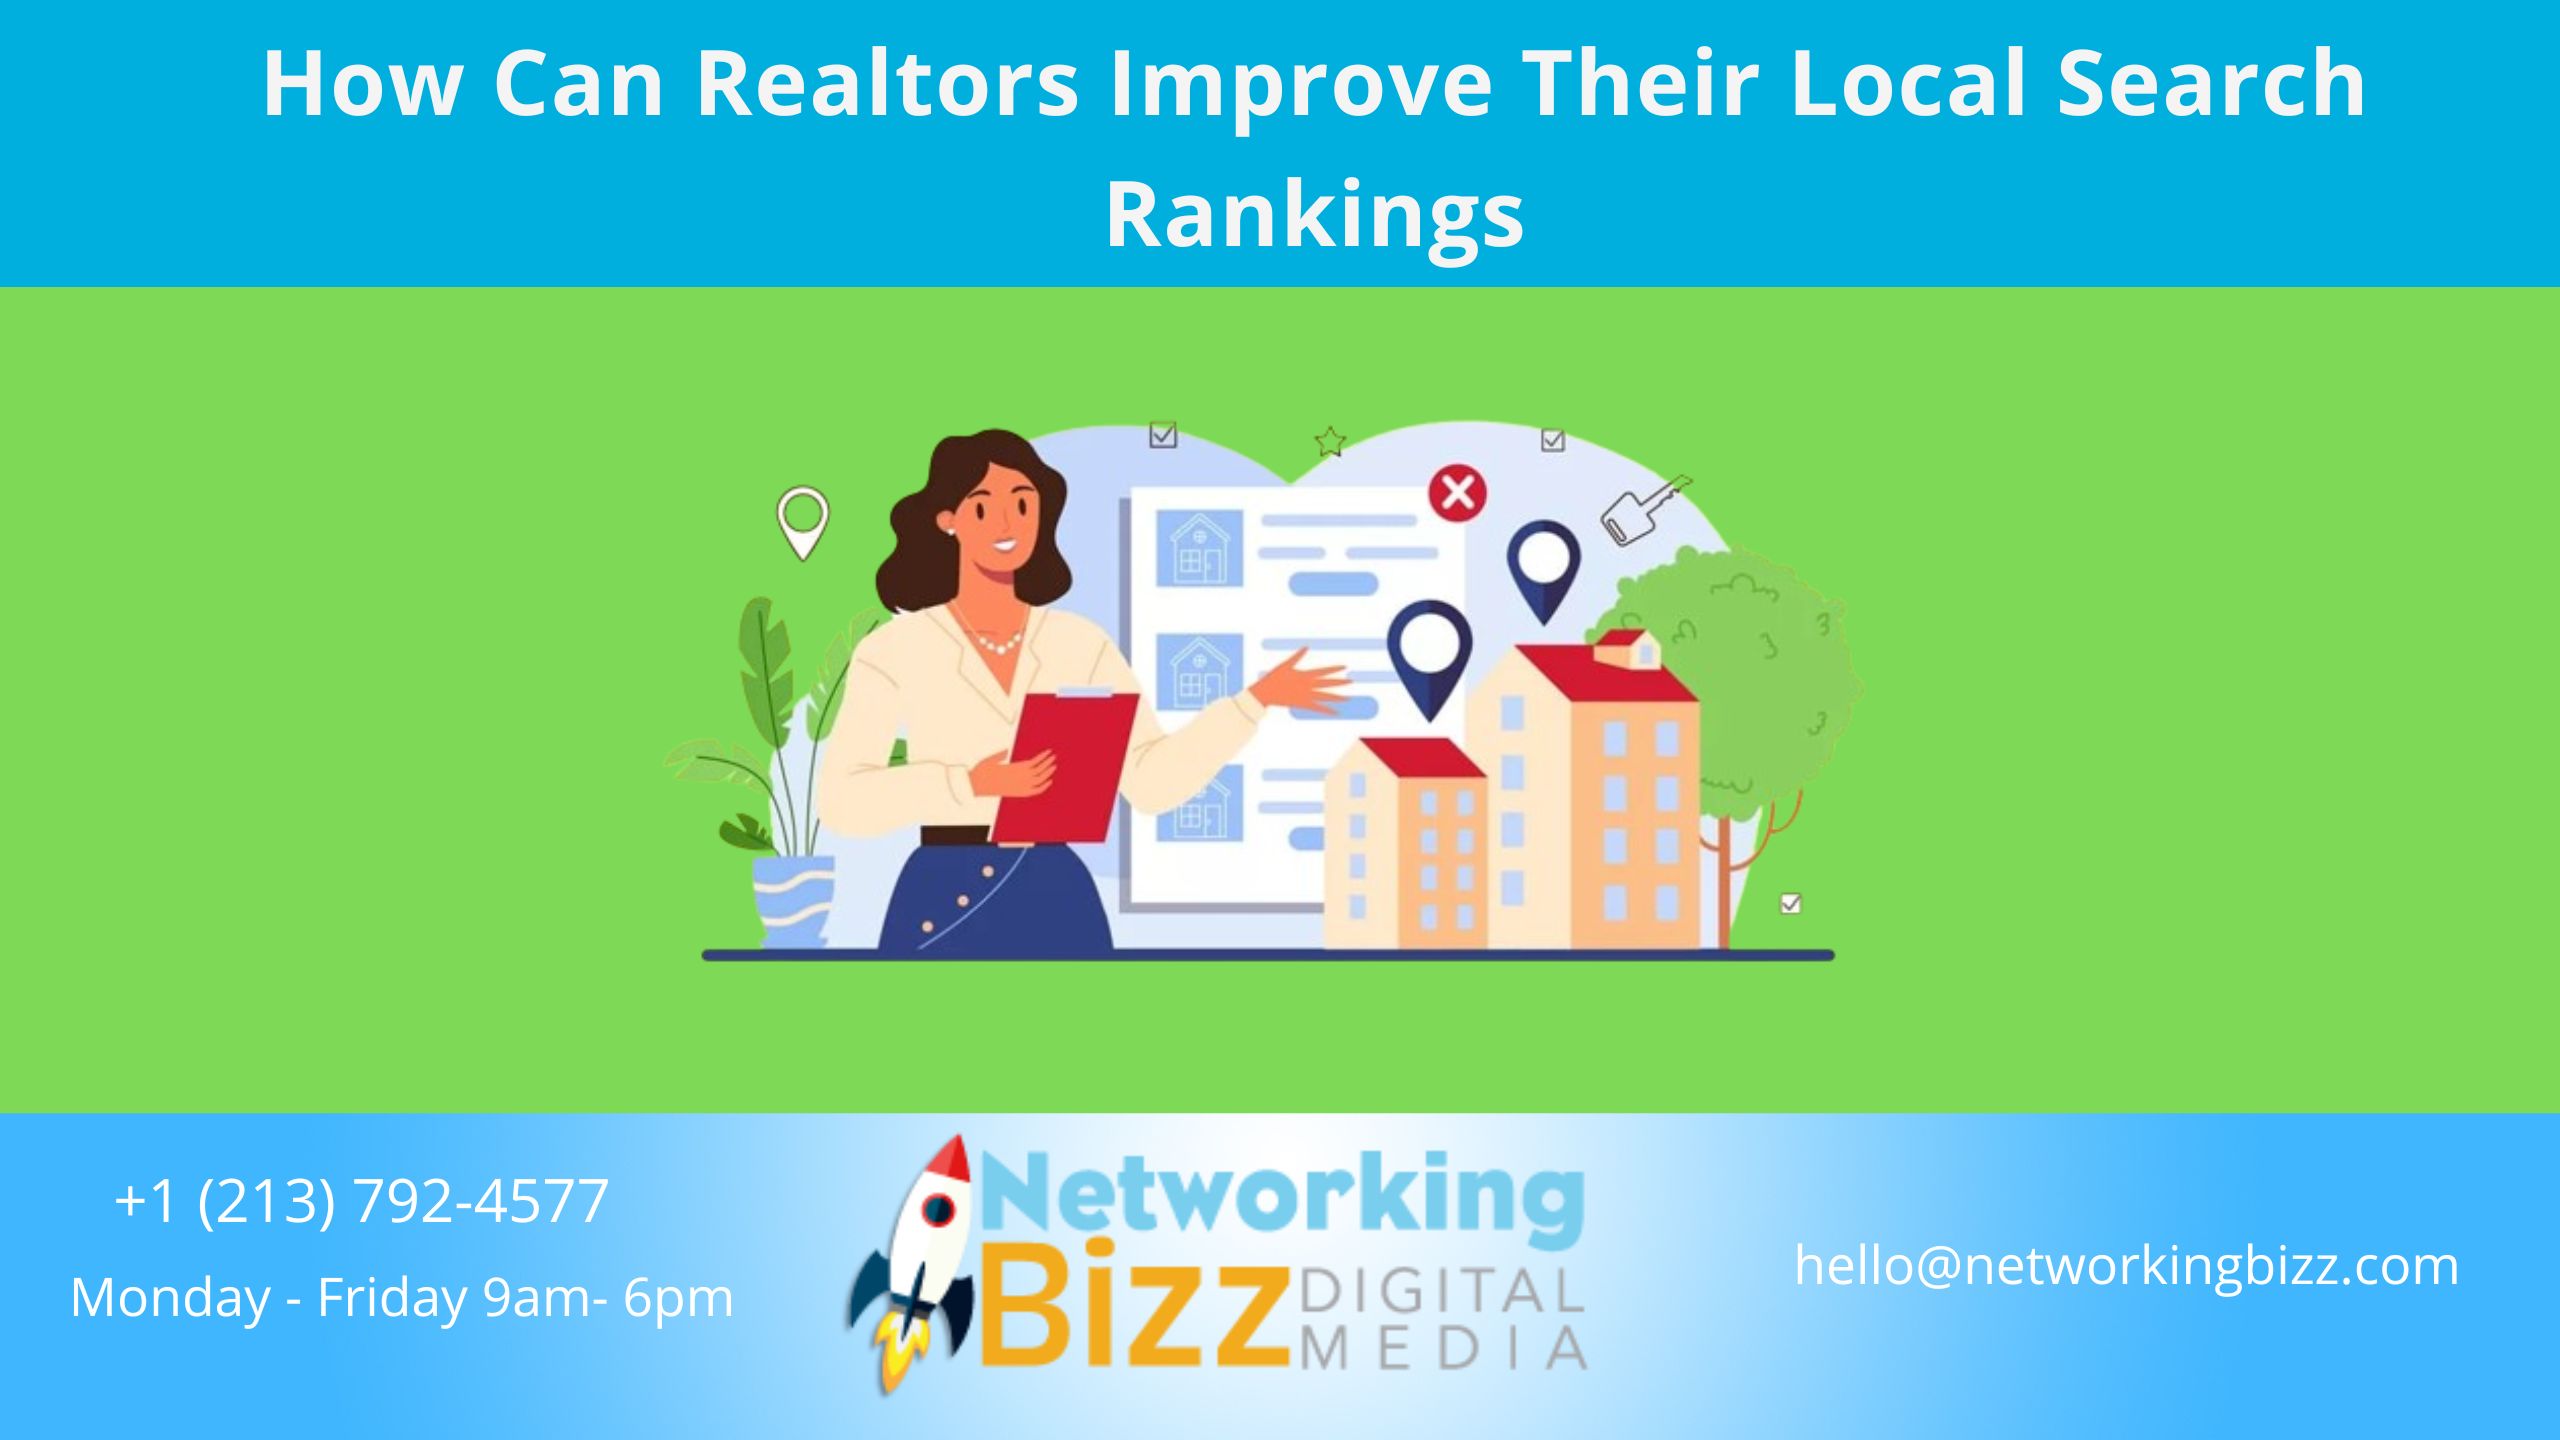 How Can Realtors Improve Their Local Search Rankings